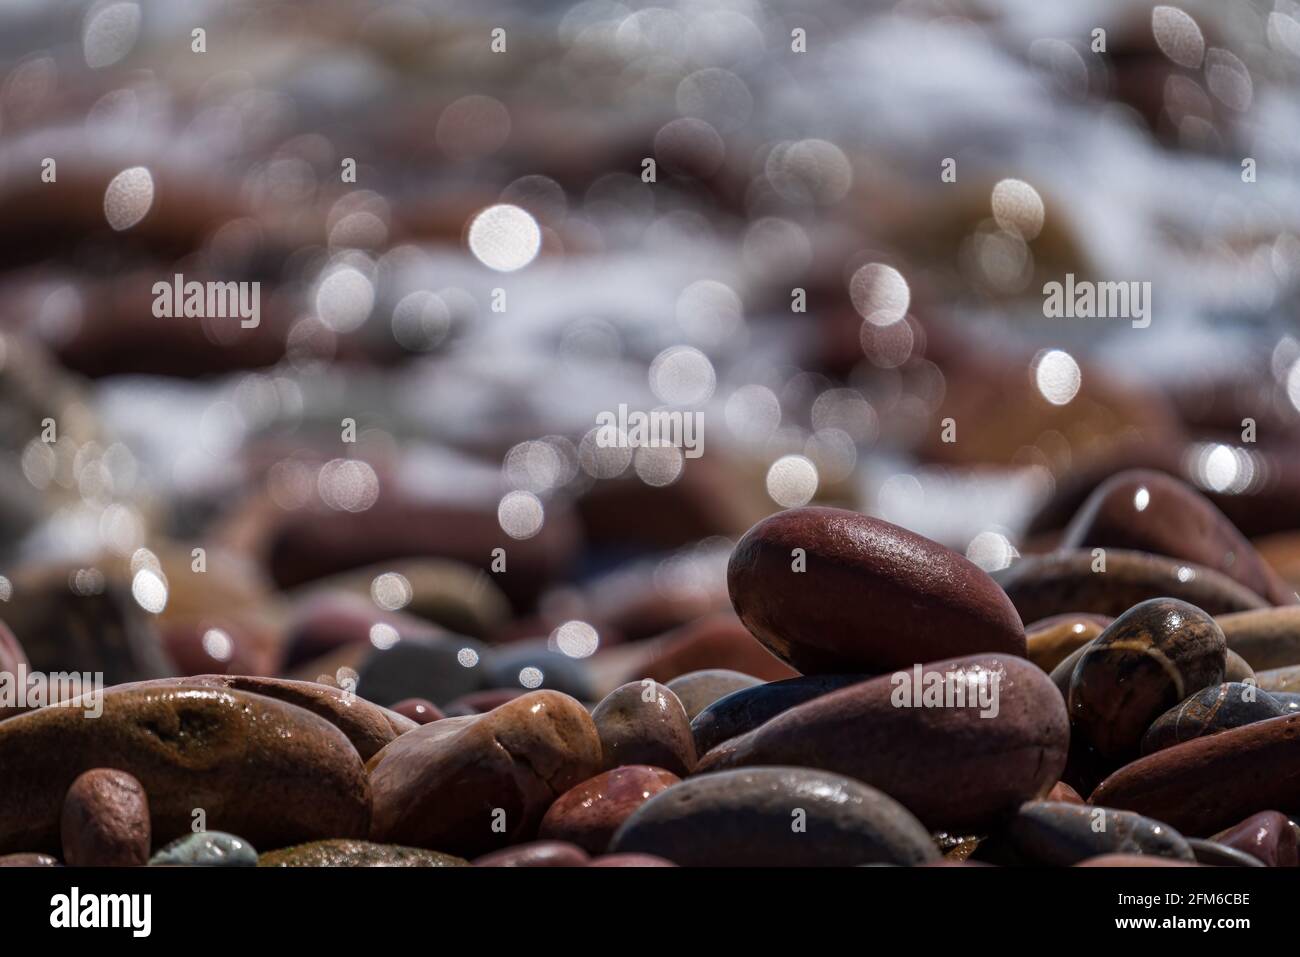 Stones near the ocean with blurred background Stock Photo